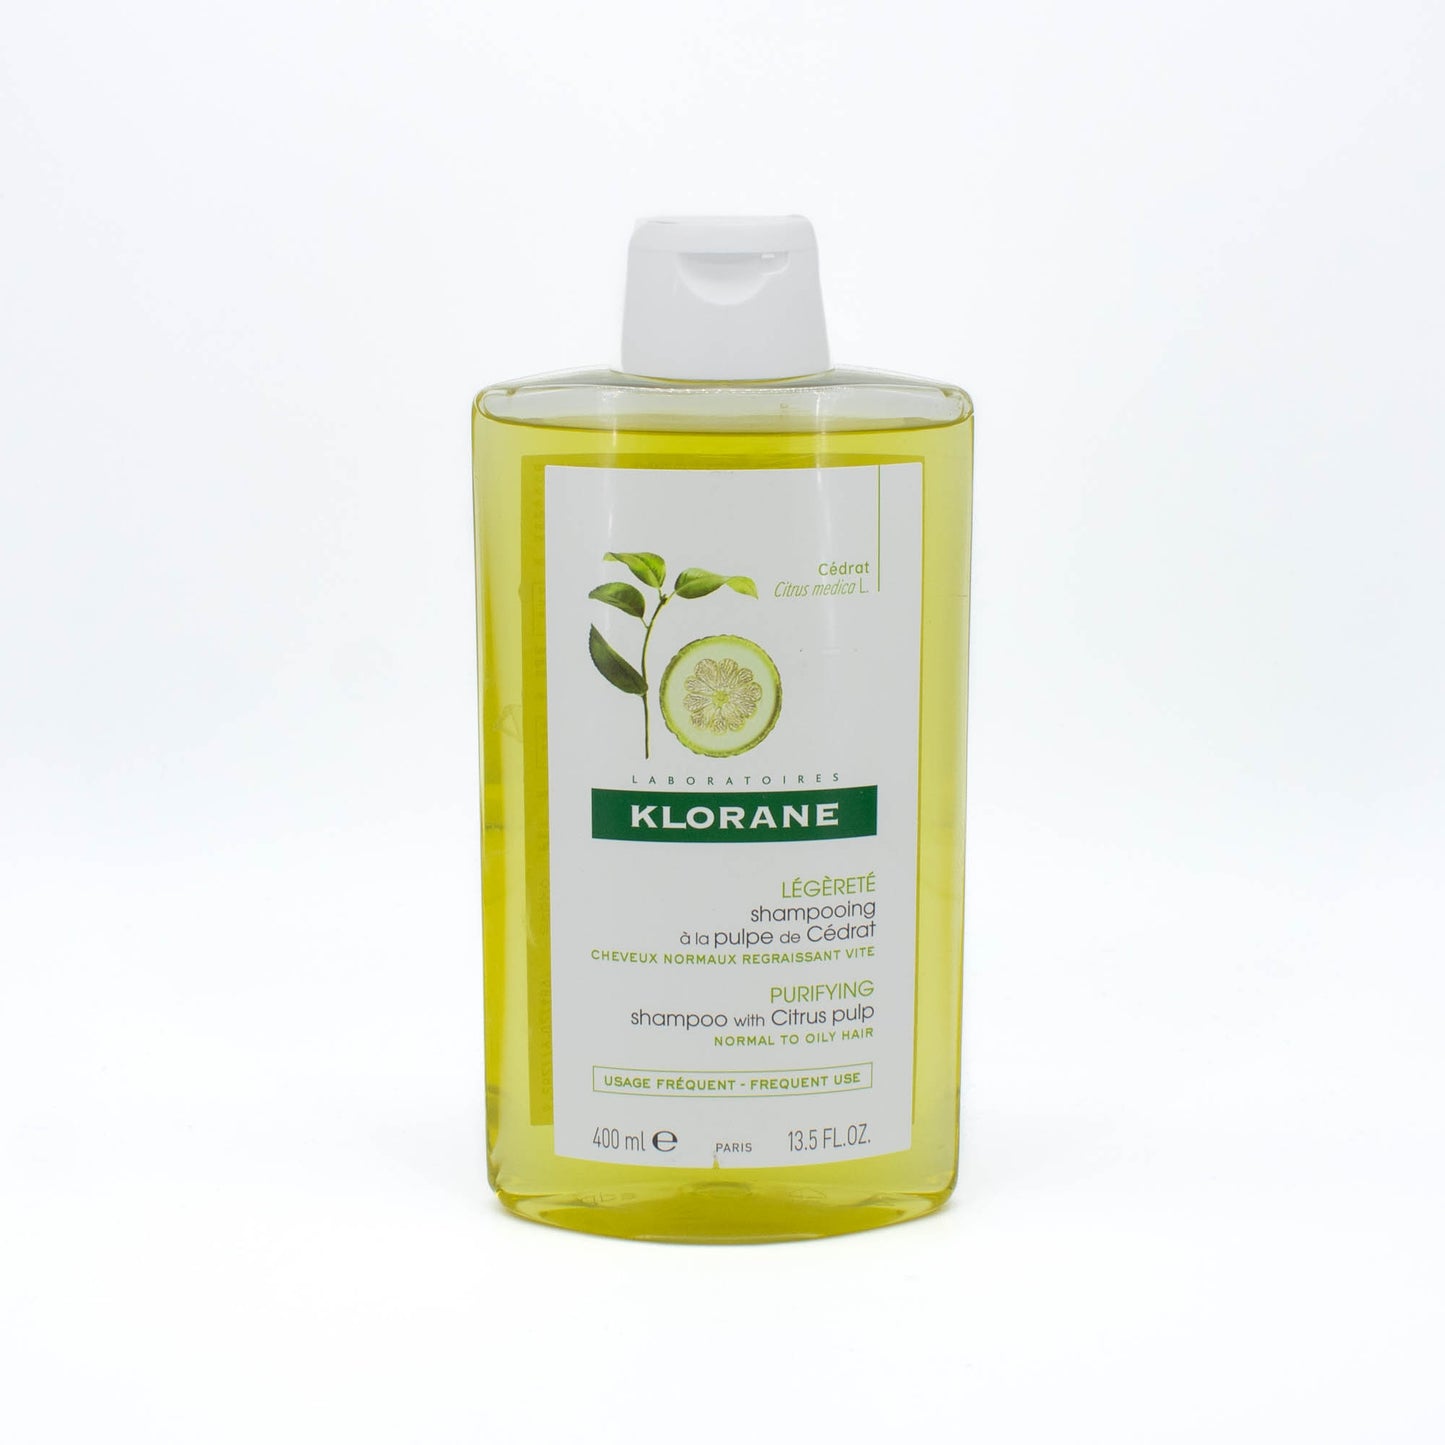 KLORANE Purifying Shampoo with Citrus Pulp 13.5oz - Small Amount Missing